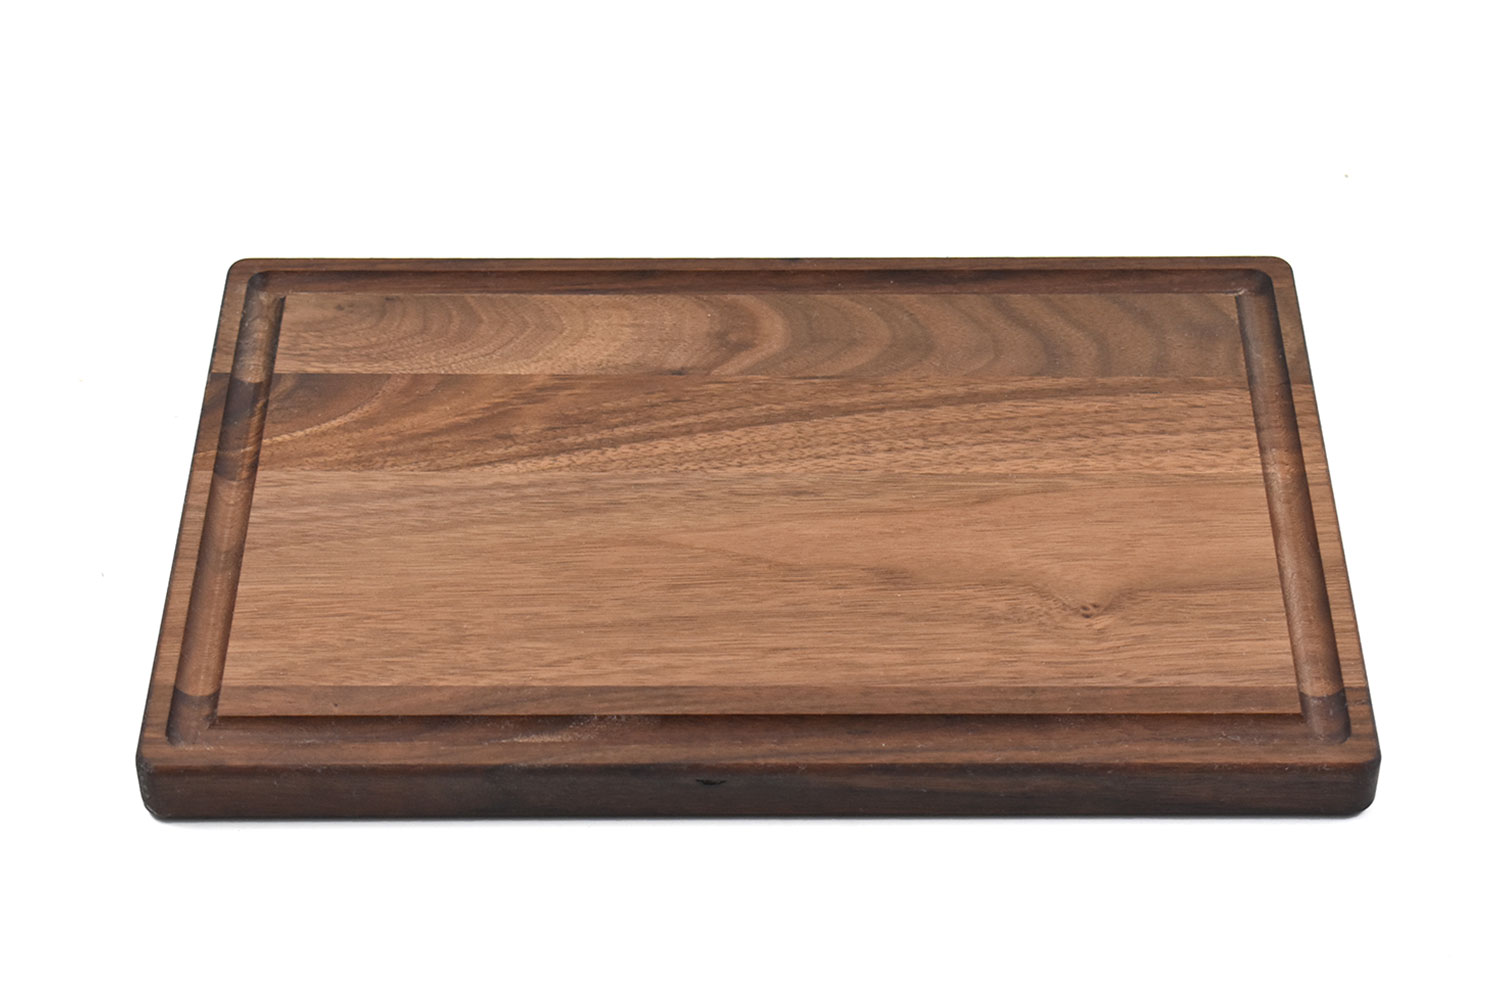 Rectangular cutting board with rounded corners & juice groove